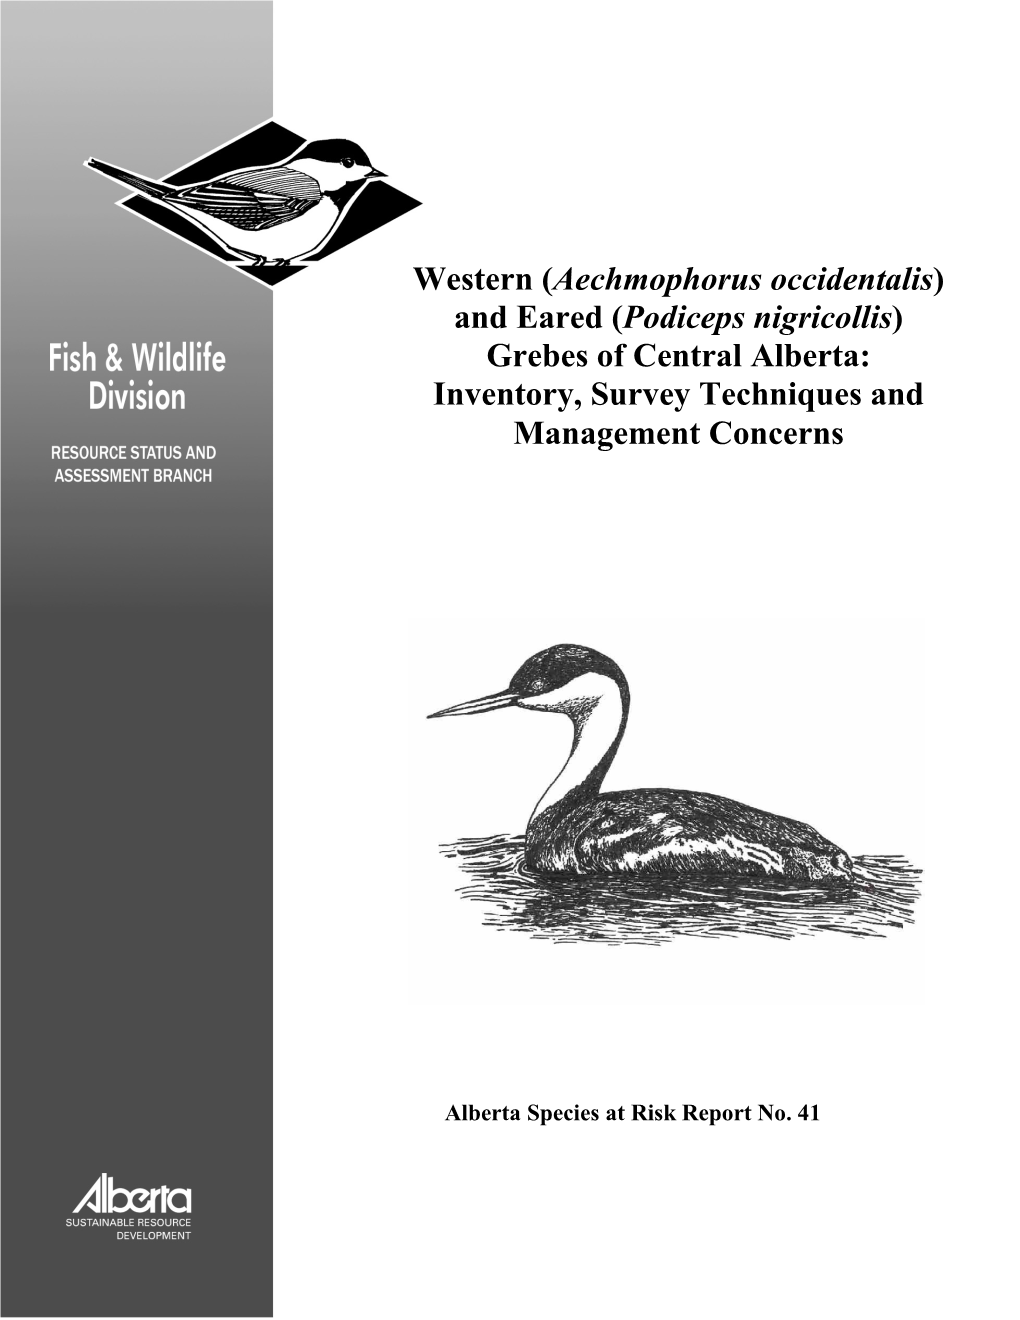 And Eared (Podiceps Nigricollis) Grebes of Central Alberta: Inventory, Survey Techniques and Management Concerns